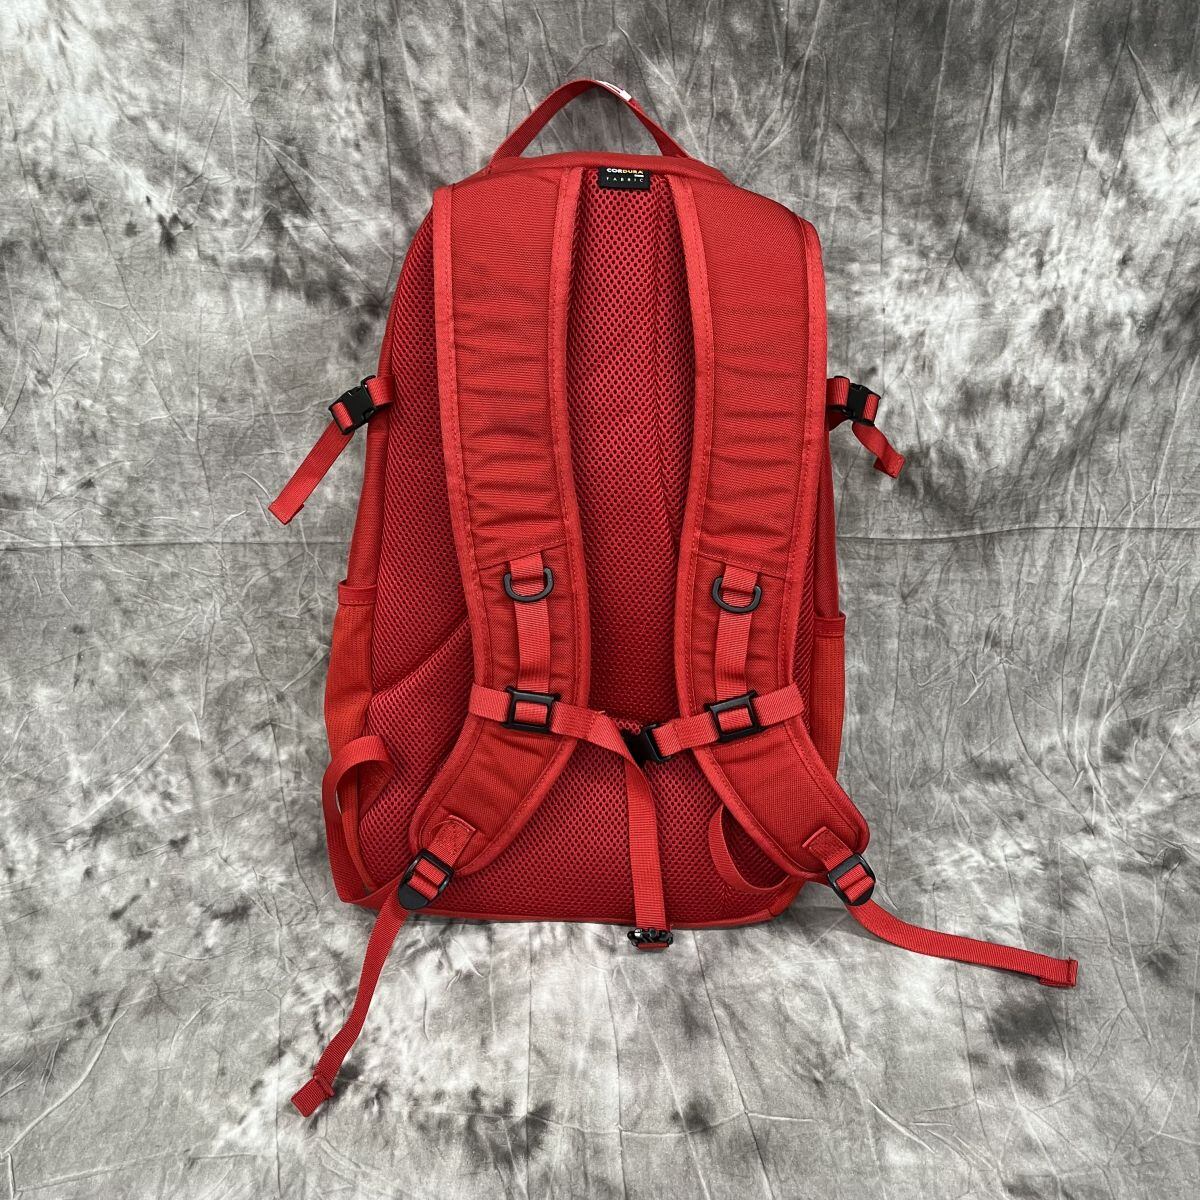 Supreme Backpack バックパック 18ss red